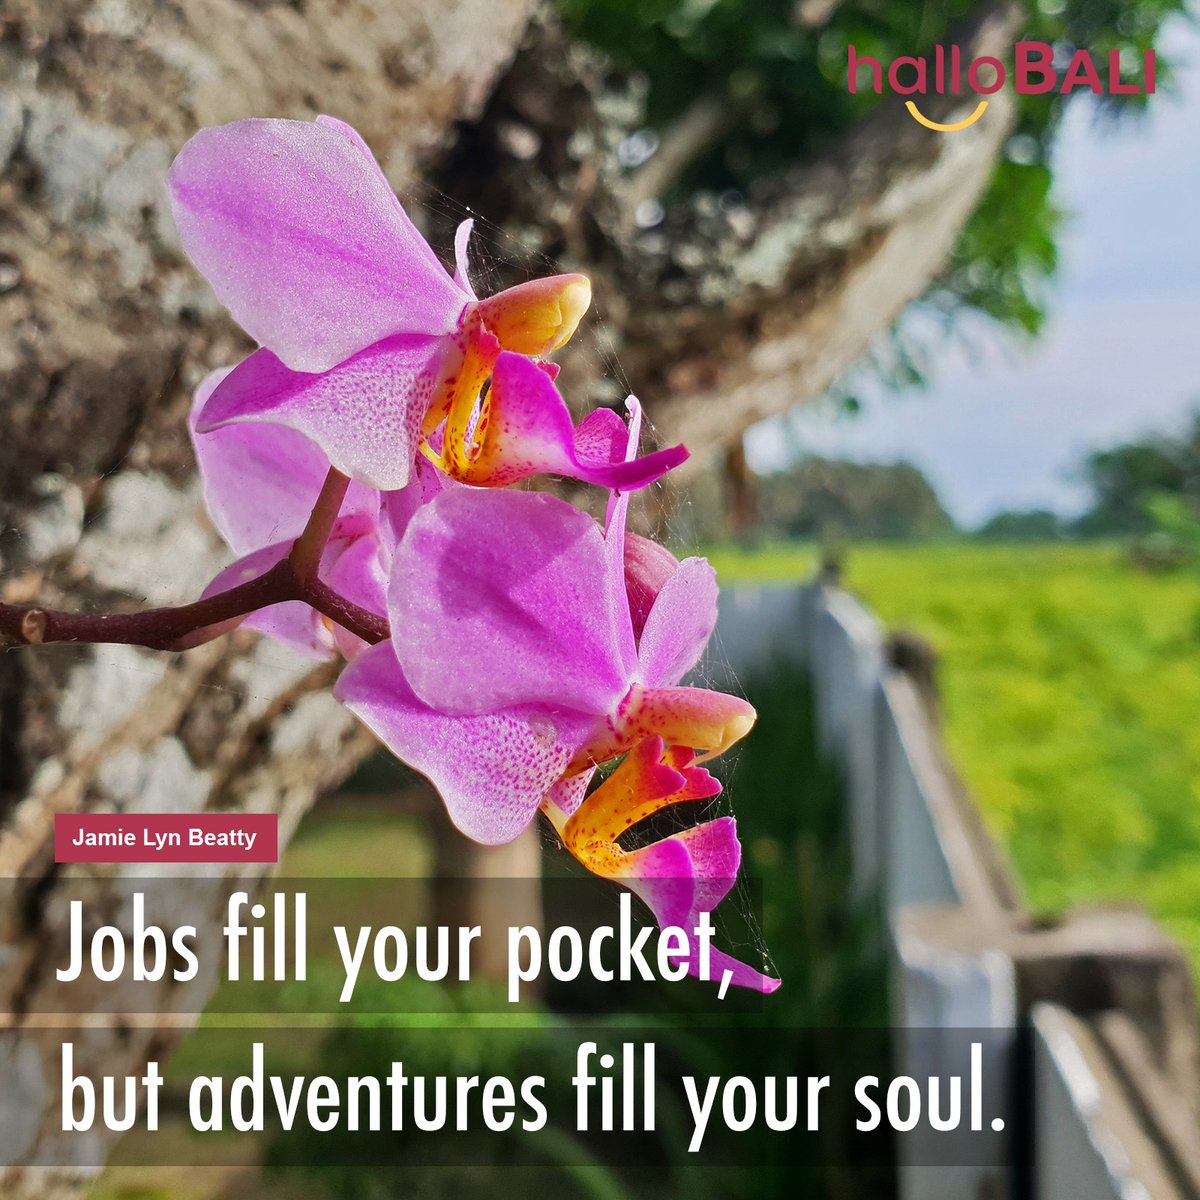 Jobs fill your pocket, but adventures fill your soul. ~ Jamie Lyn Beatty
#Bali #Orchid #BaliOrchid #Quote #Travel #TravelQuote #MorningQuote #InstaQuote #QuoteOfTheDay